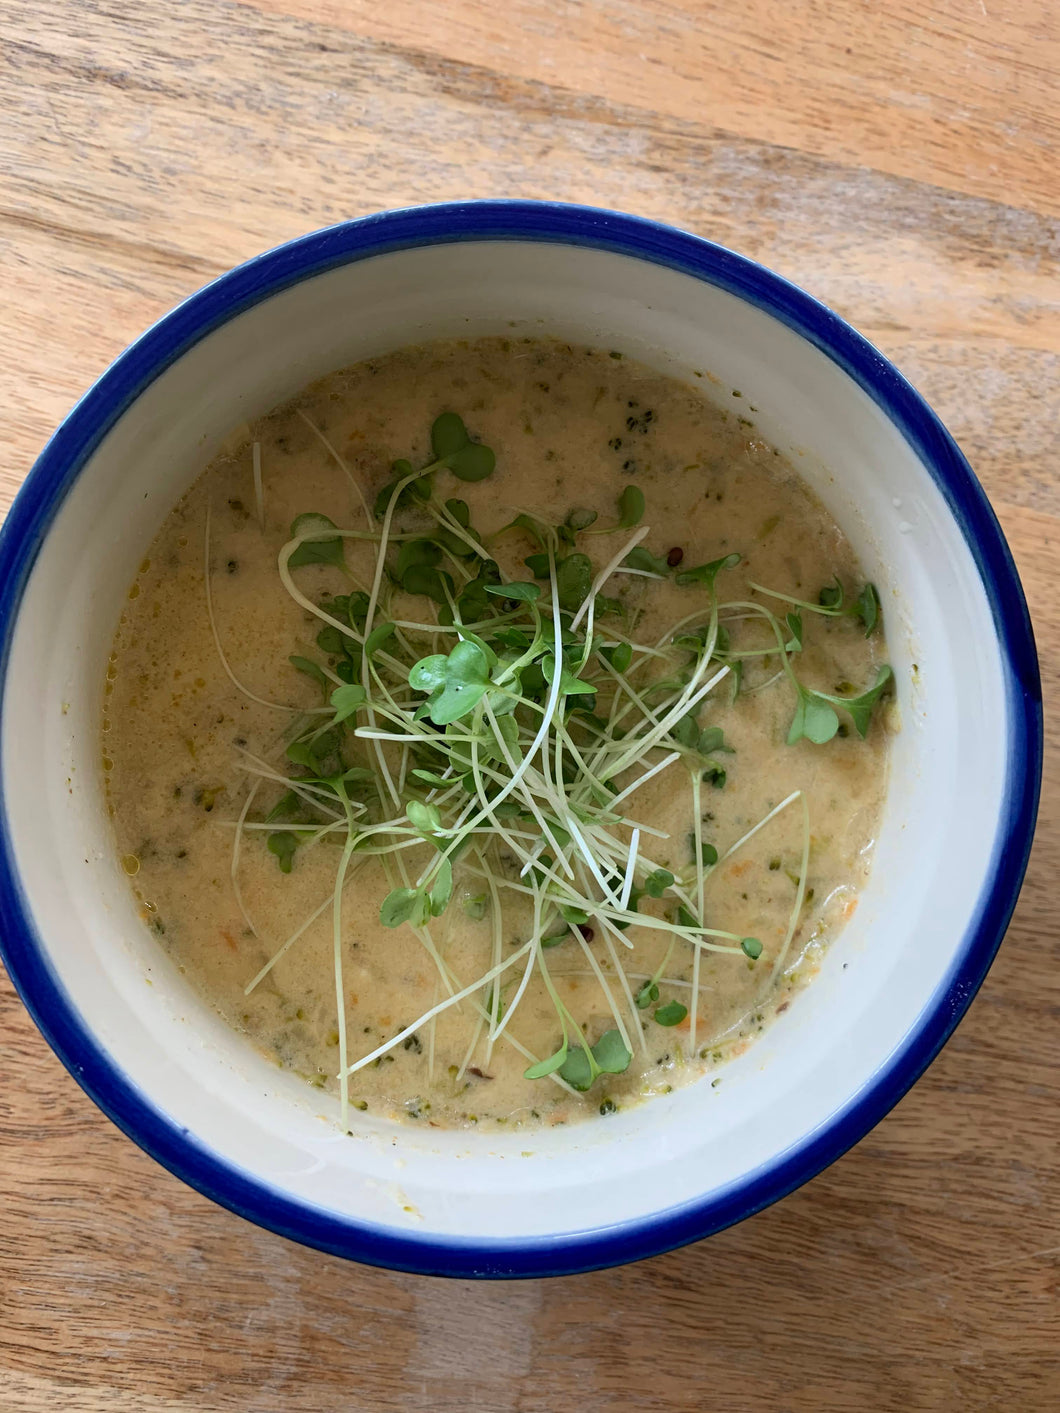 Broccoli cheese soup in a bowl with broccoli microgreens